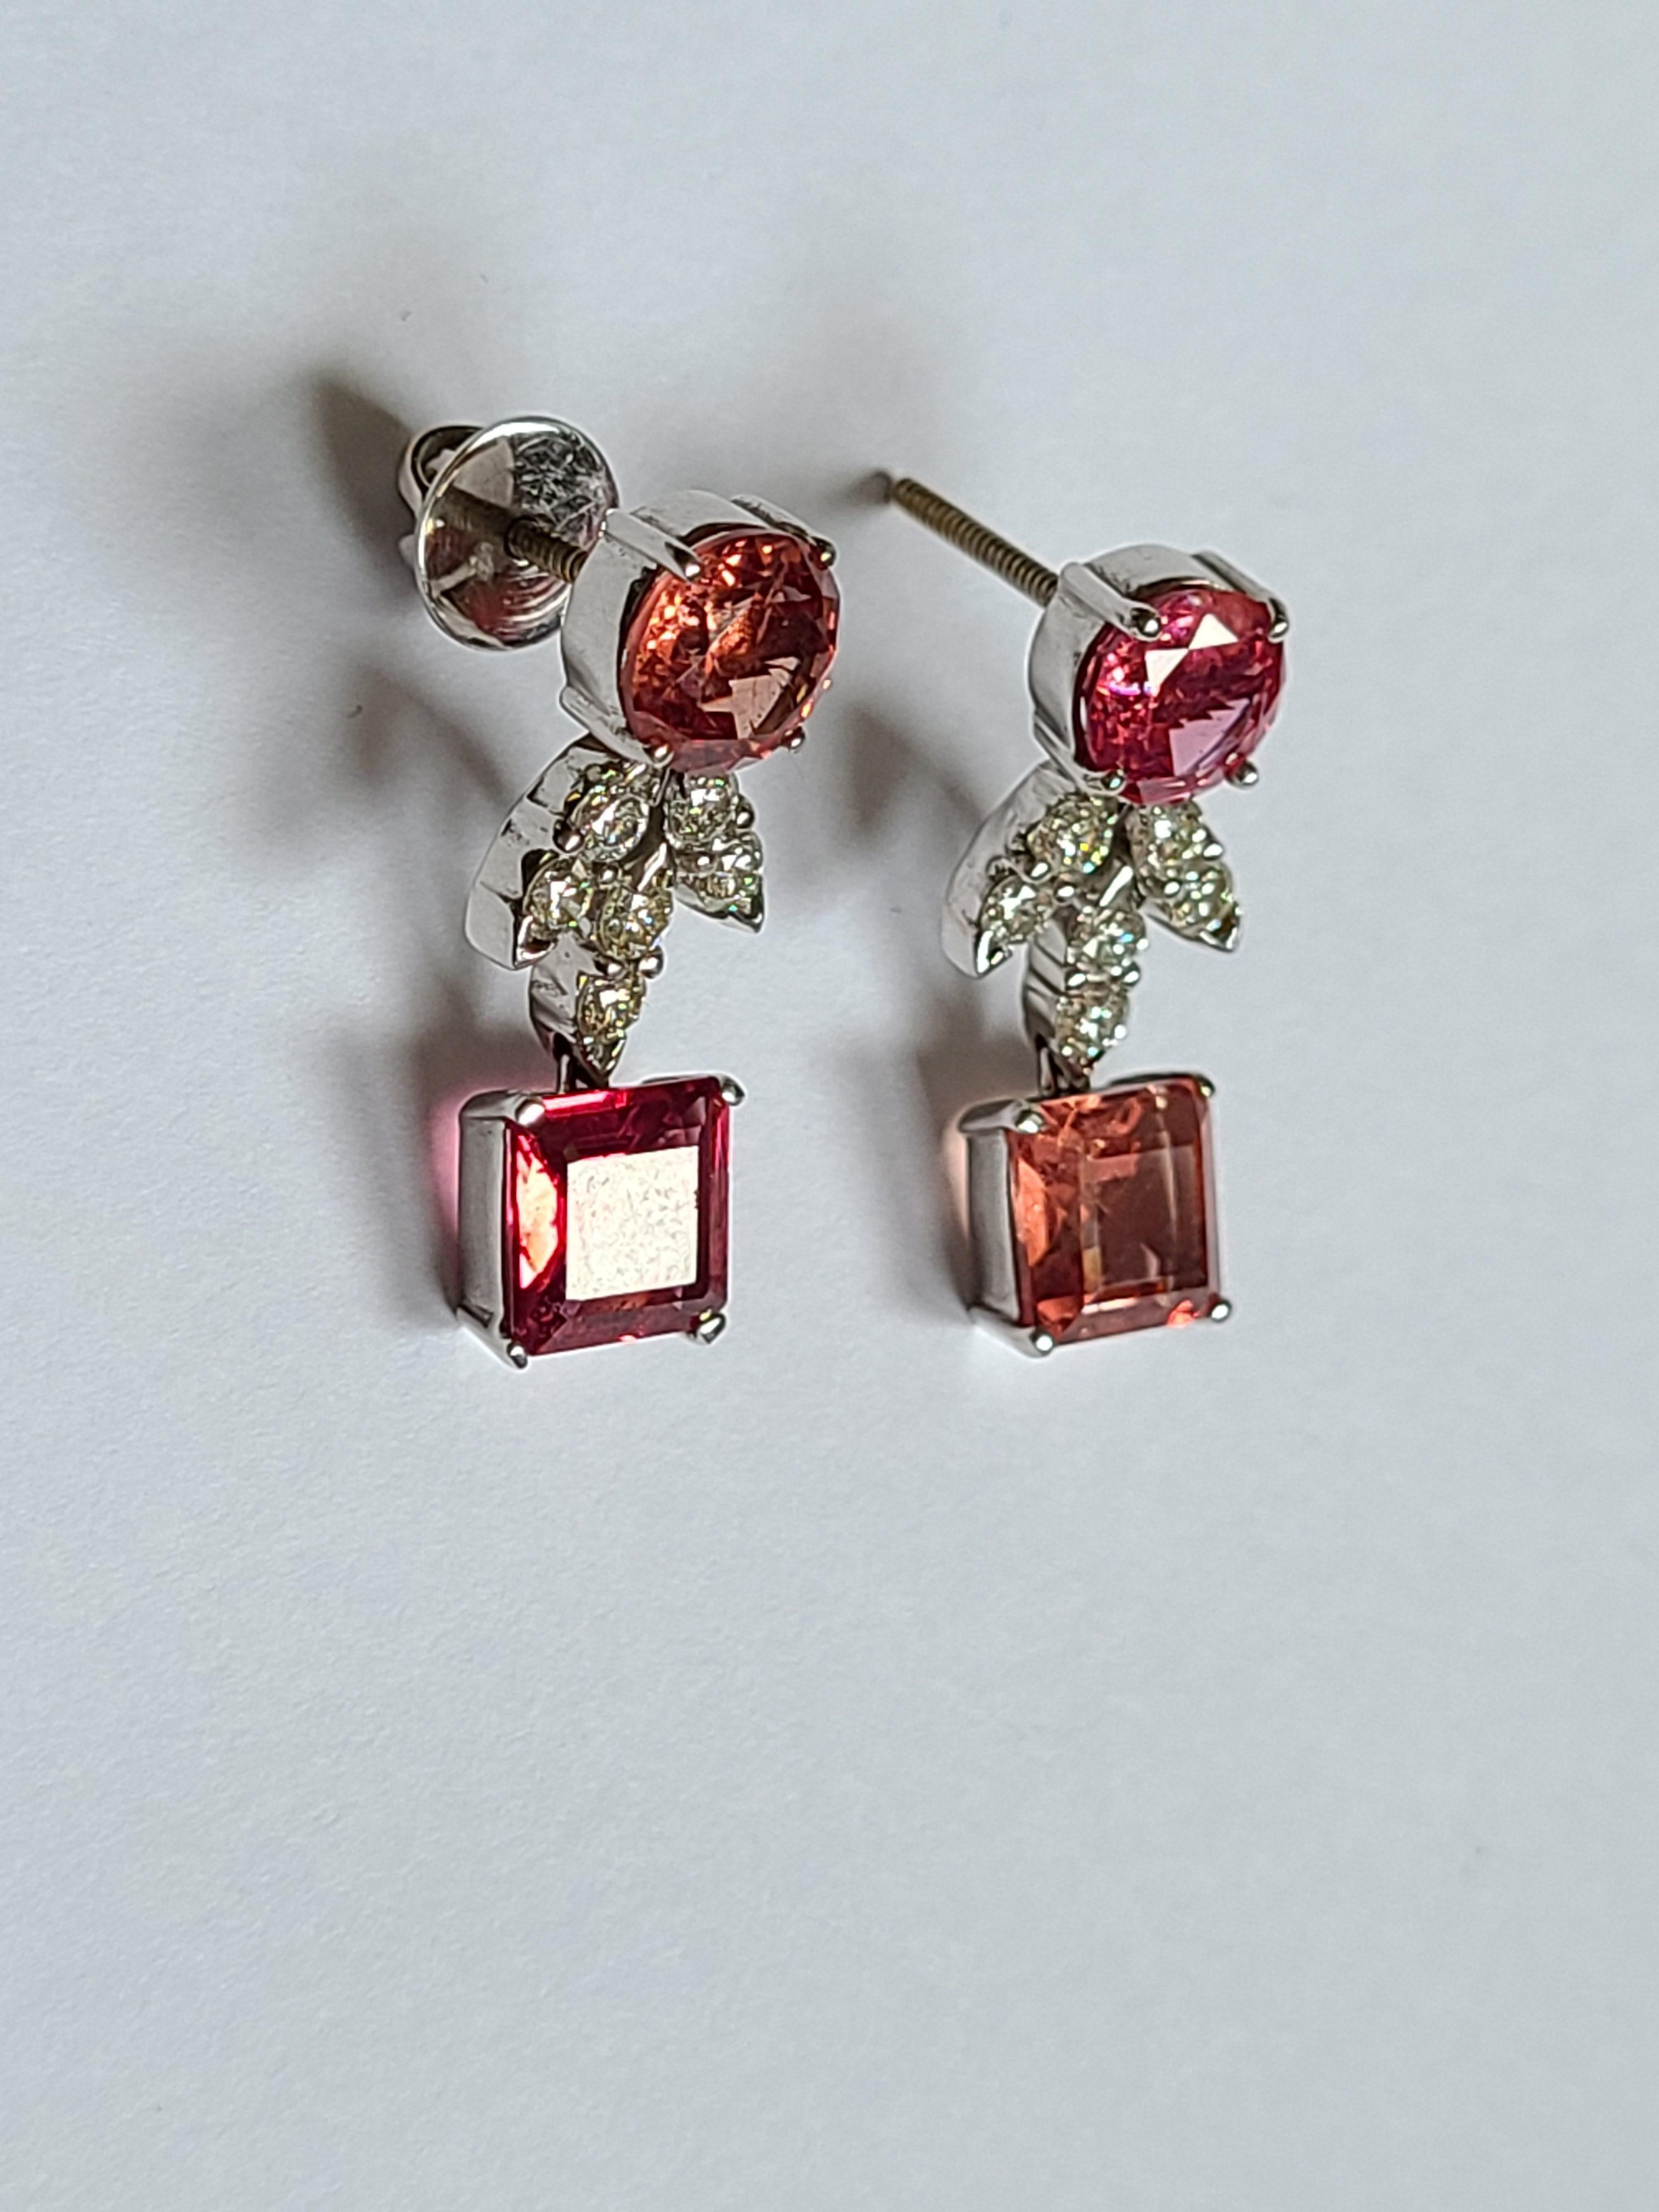 A beautiful Spinel earrings with diamonds set in 18k gold with diamonds. The spinel weight is 7.71 carats and diamond weight is .76 carts. The earring dimension in cm 2.4 x .4 x .4 (LXWXH).